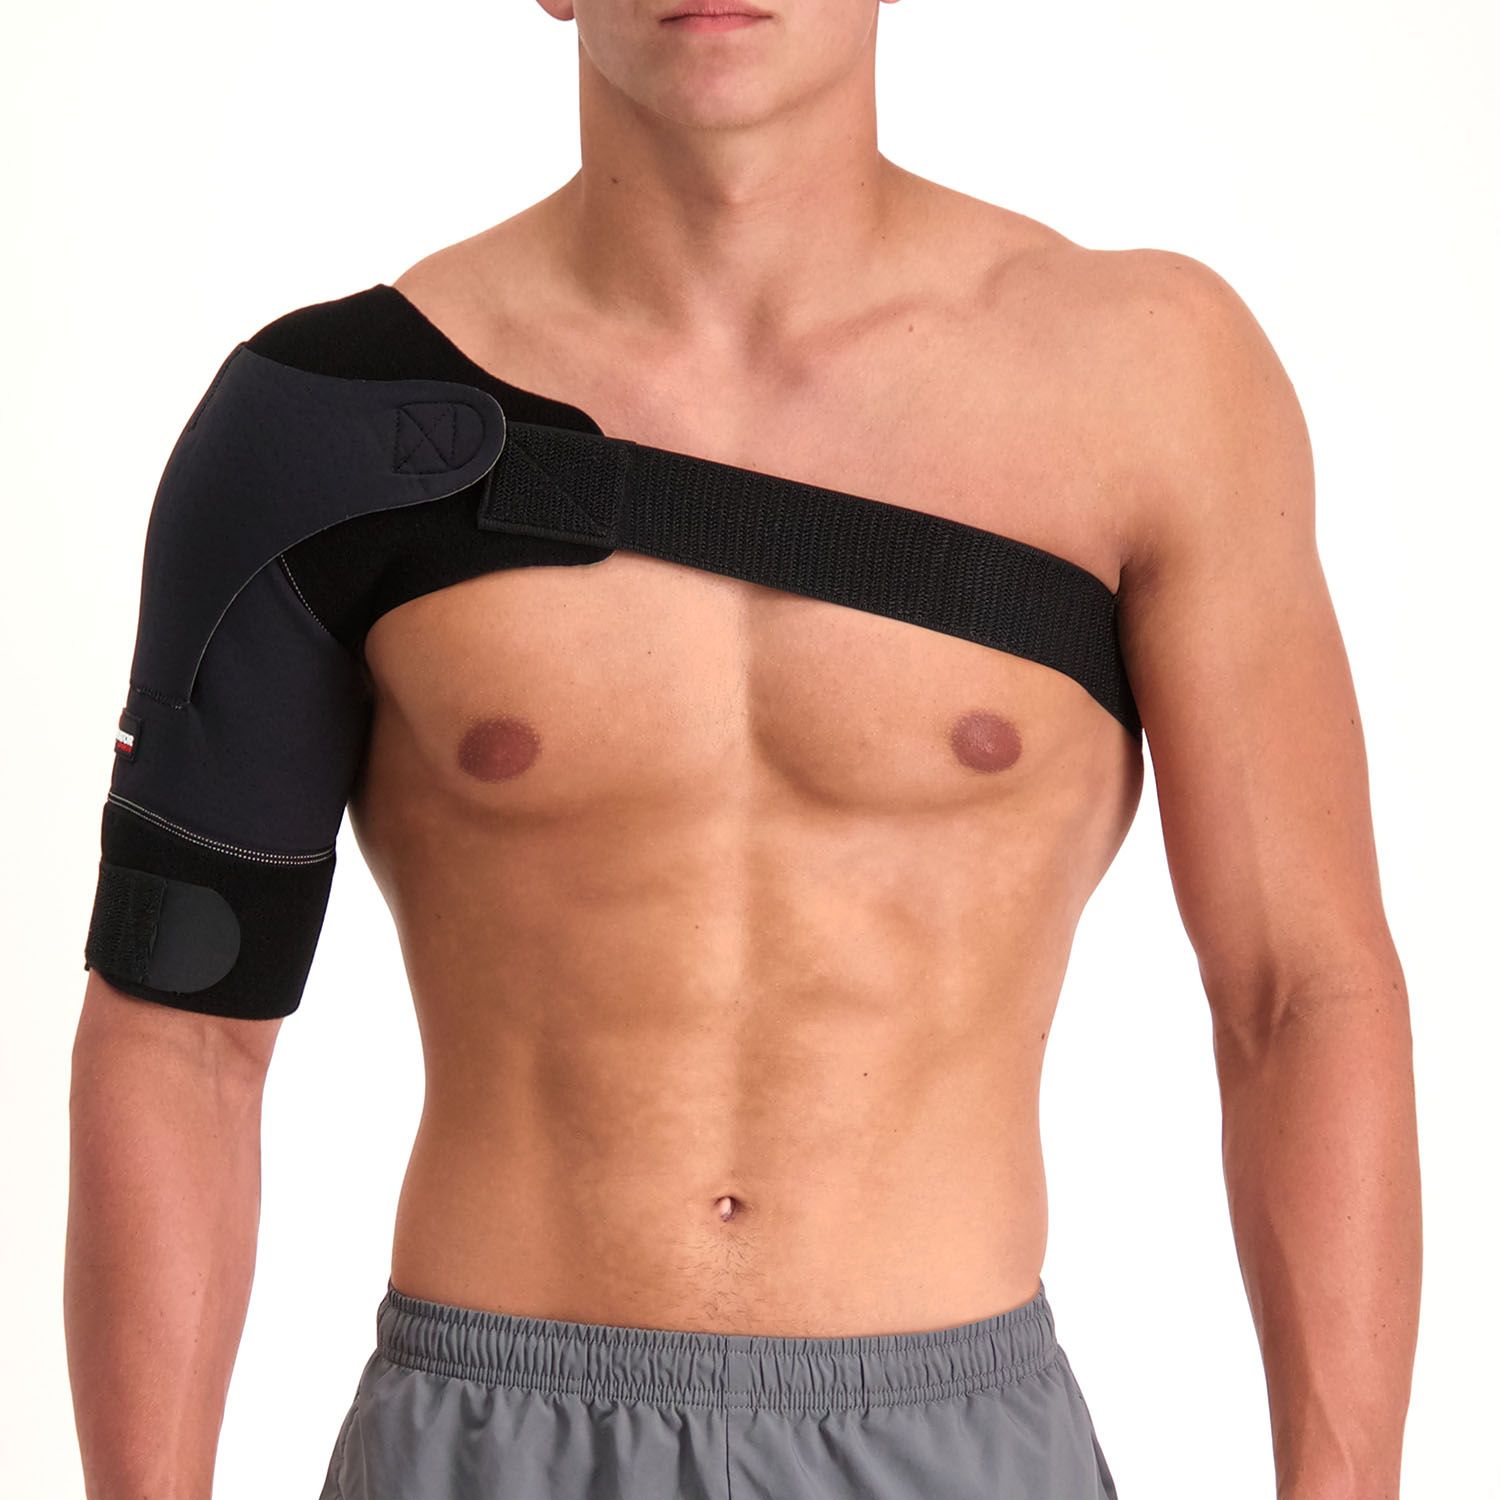 gladiator sports premium lightweight shoulder support front picture zoomed in